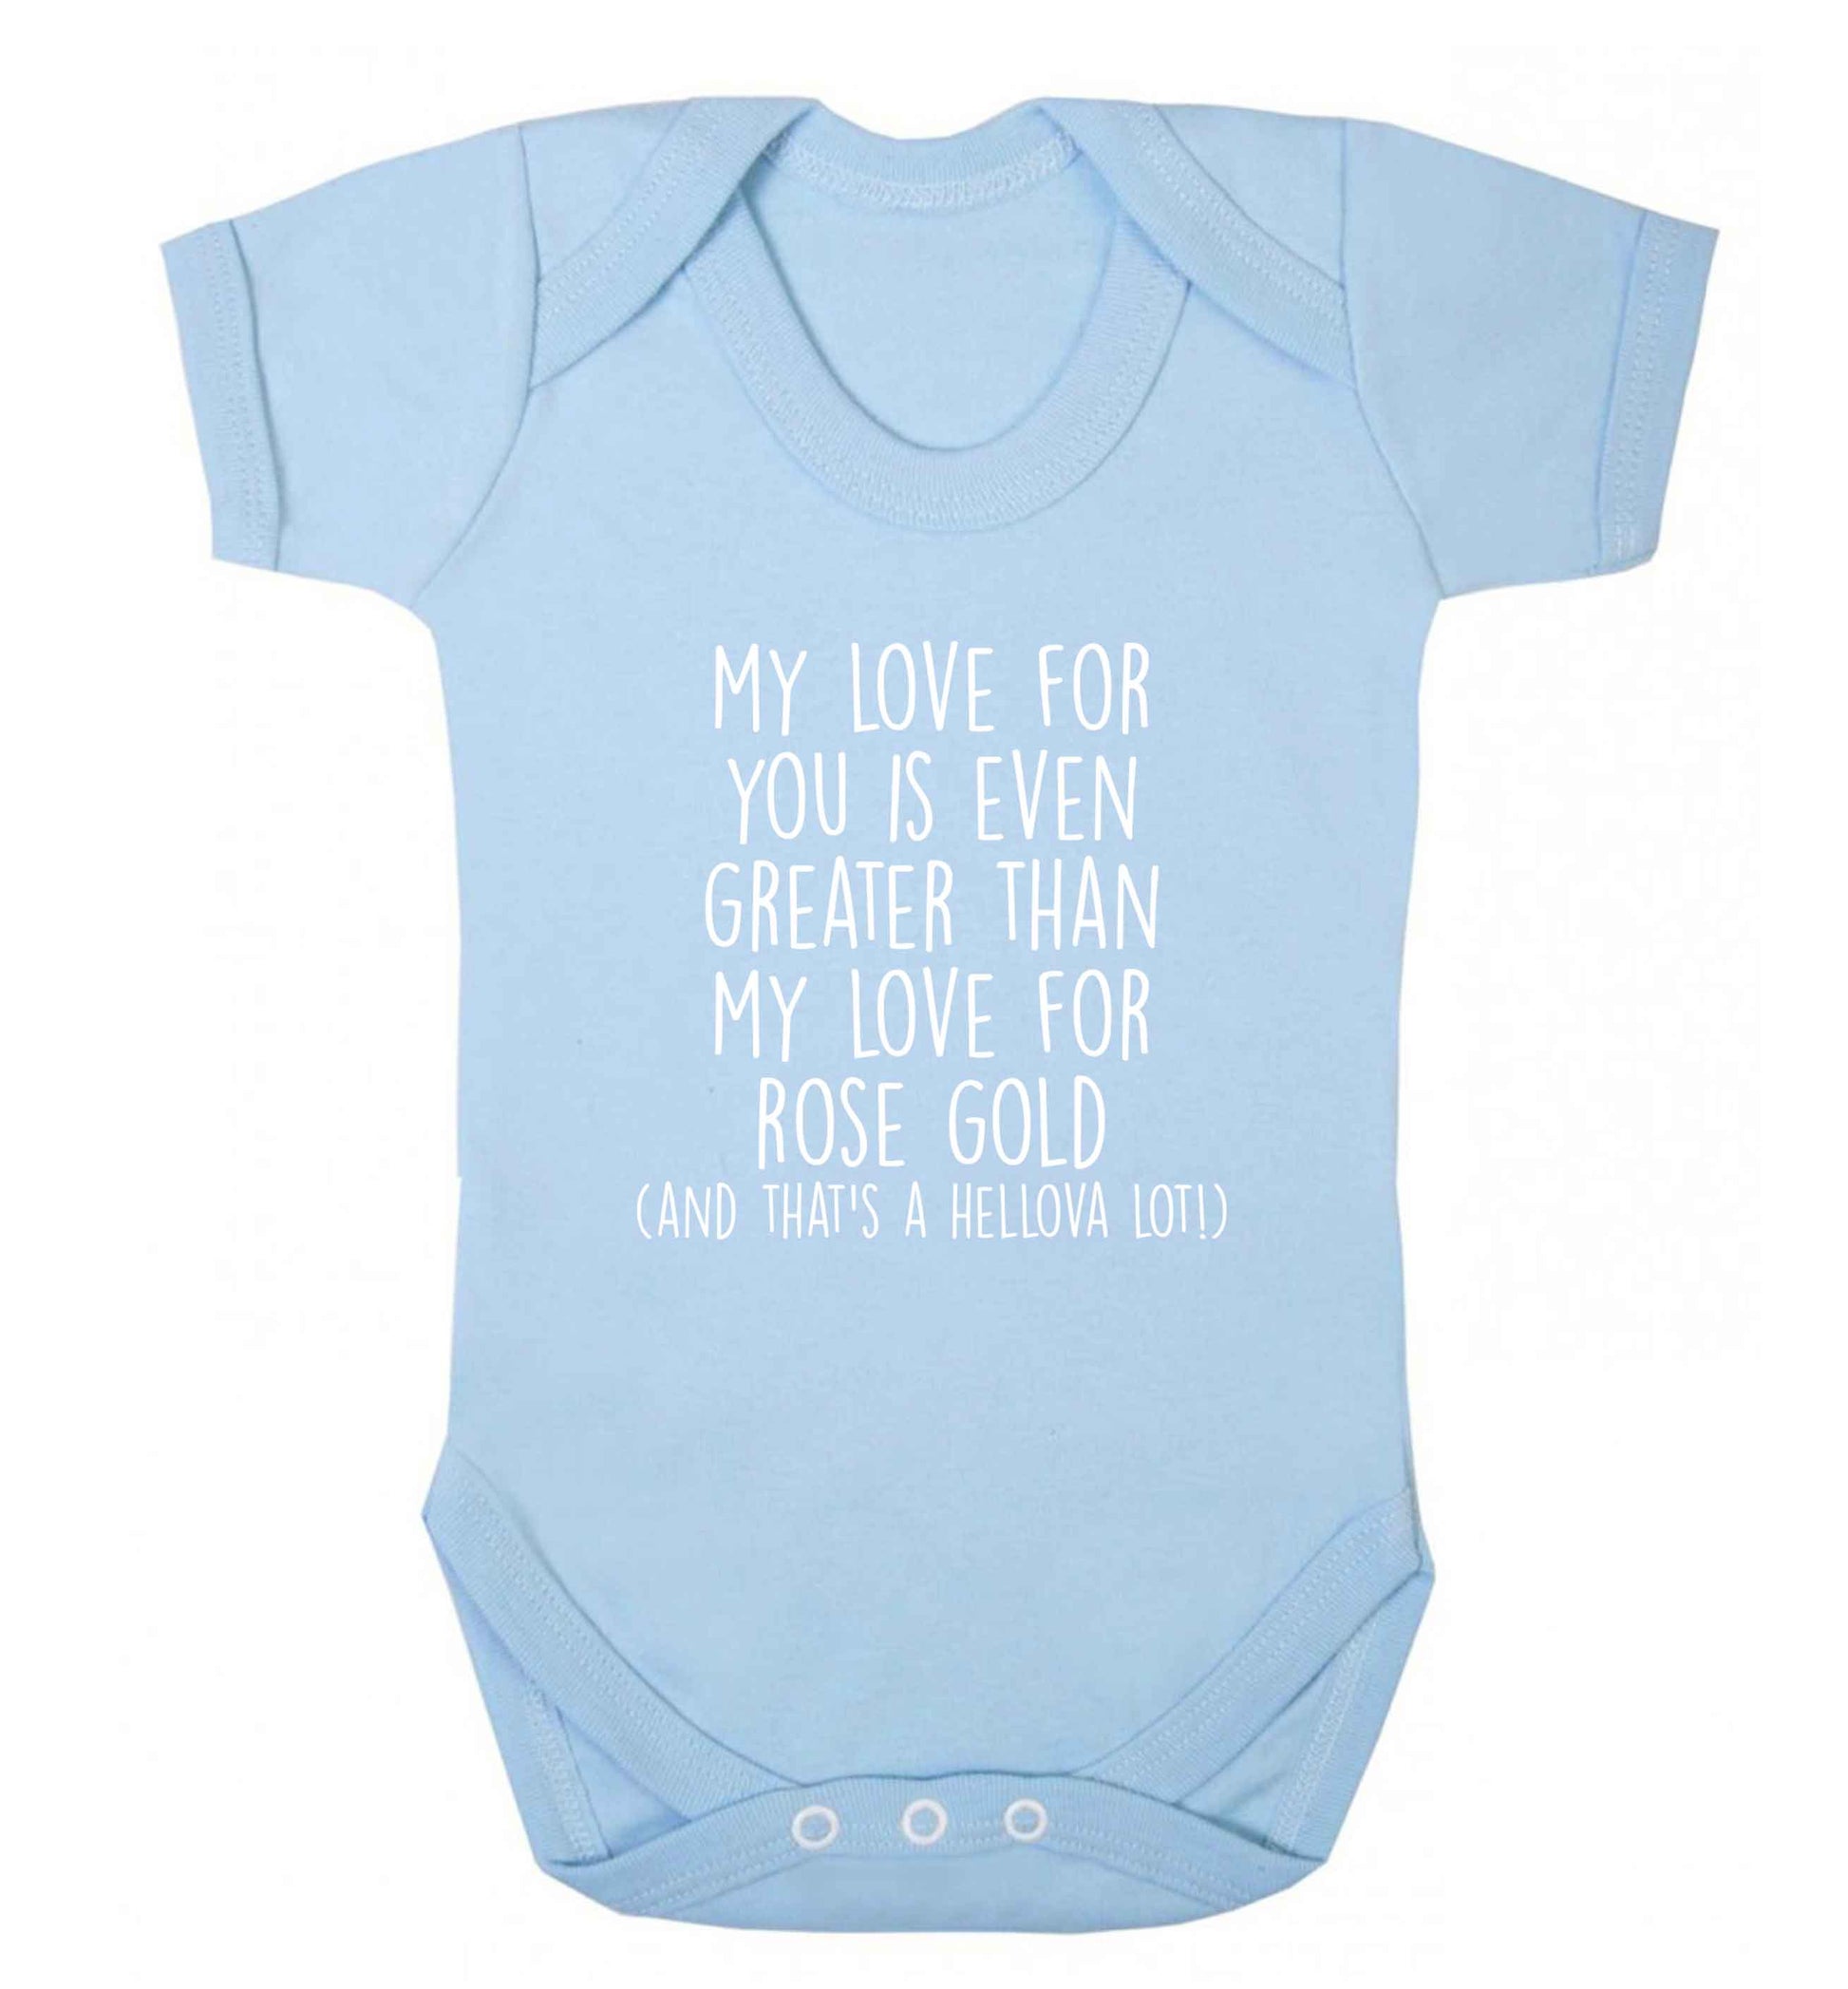 My love for you is even greater than my love for rose gold (and that's a hellova lot) baby vest pale blue 18-24 months